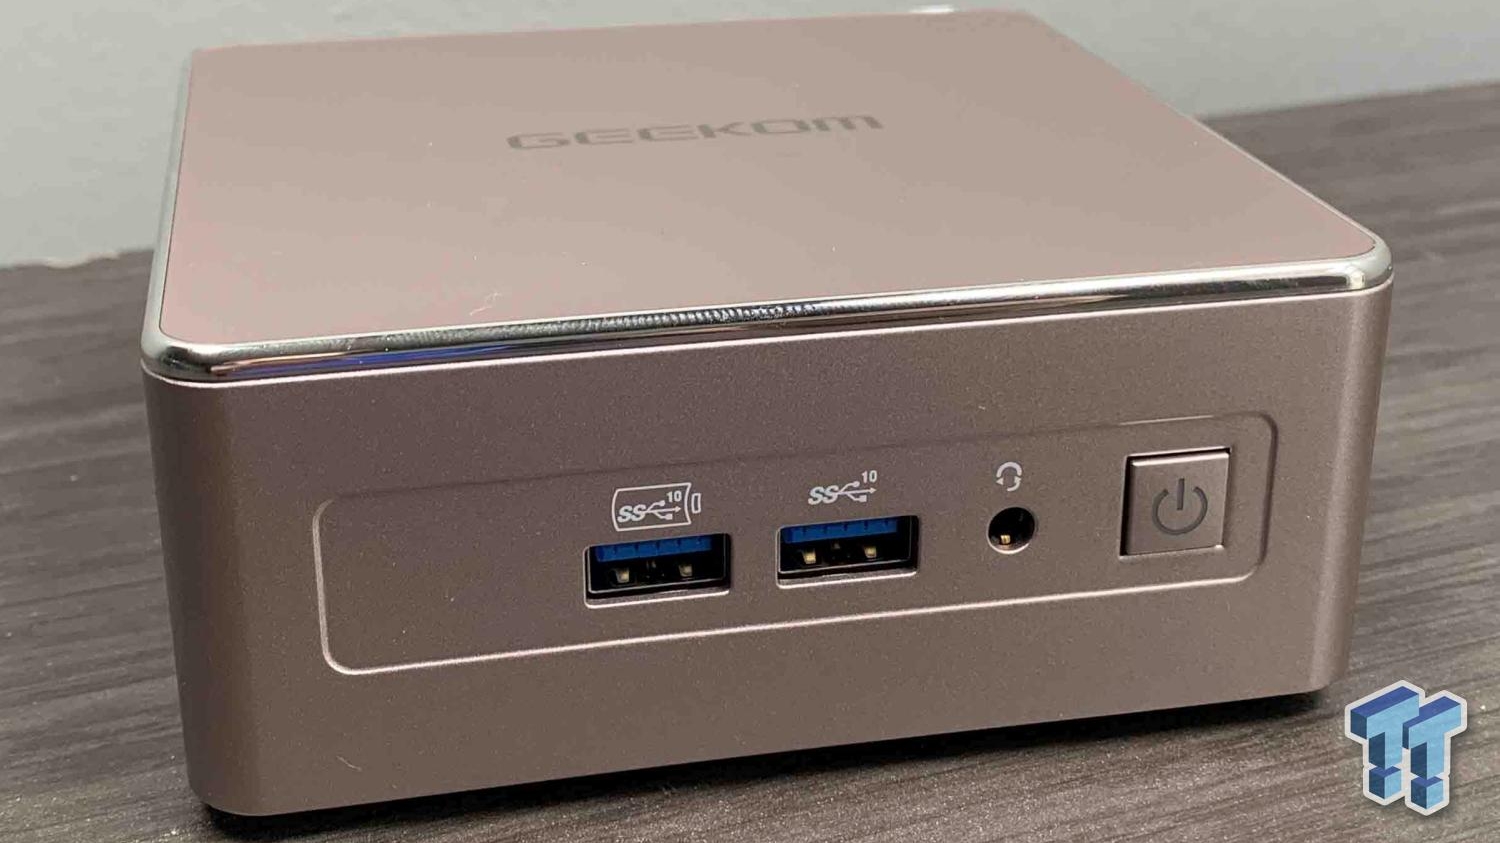 GEEKOM Mini IT13 & A5 review: More ports, choice between Intel and AMD,  performance or price